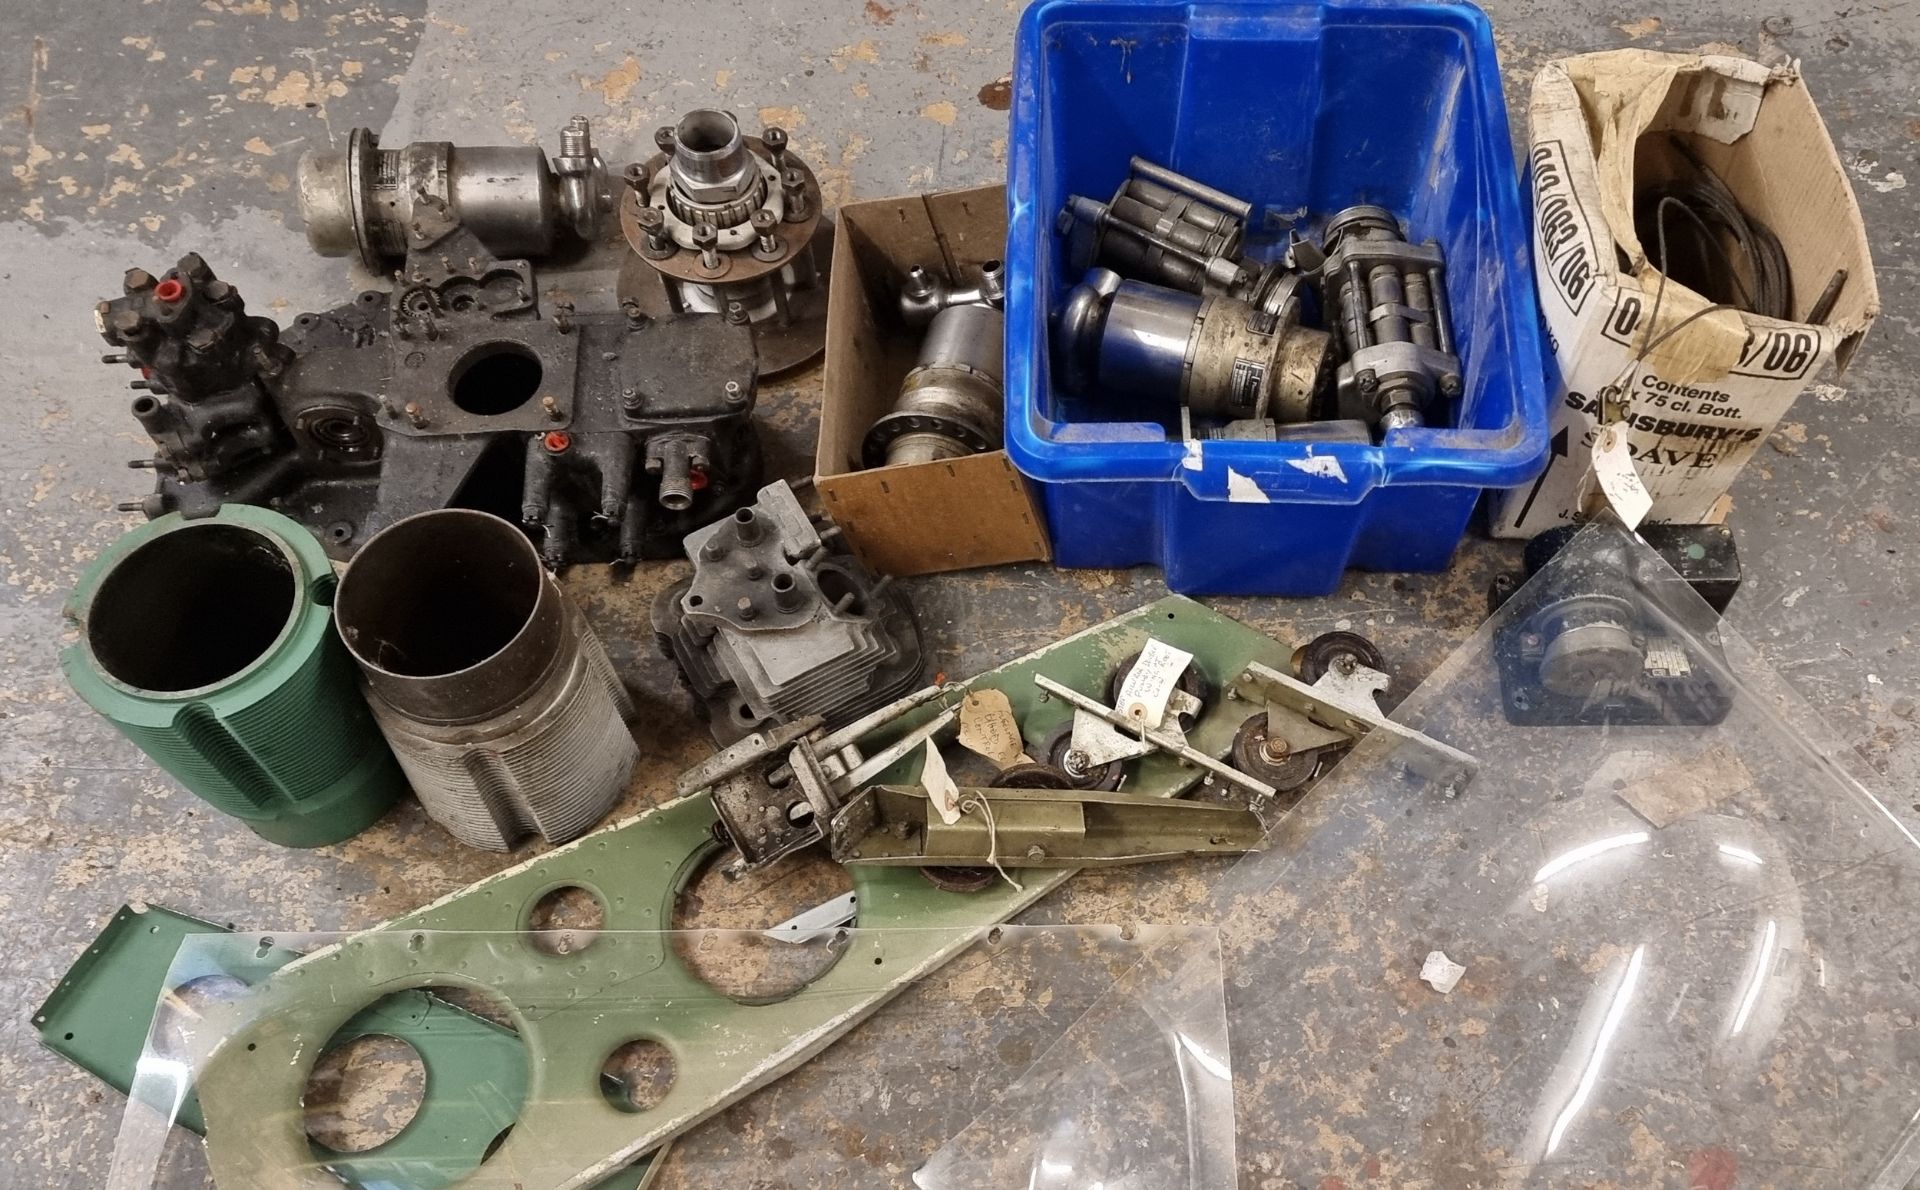 A collection of Chipmunk aeroplane parts, including ailerons pulleys, barrels and engine starters.